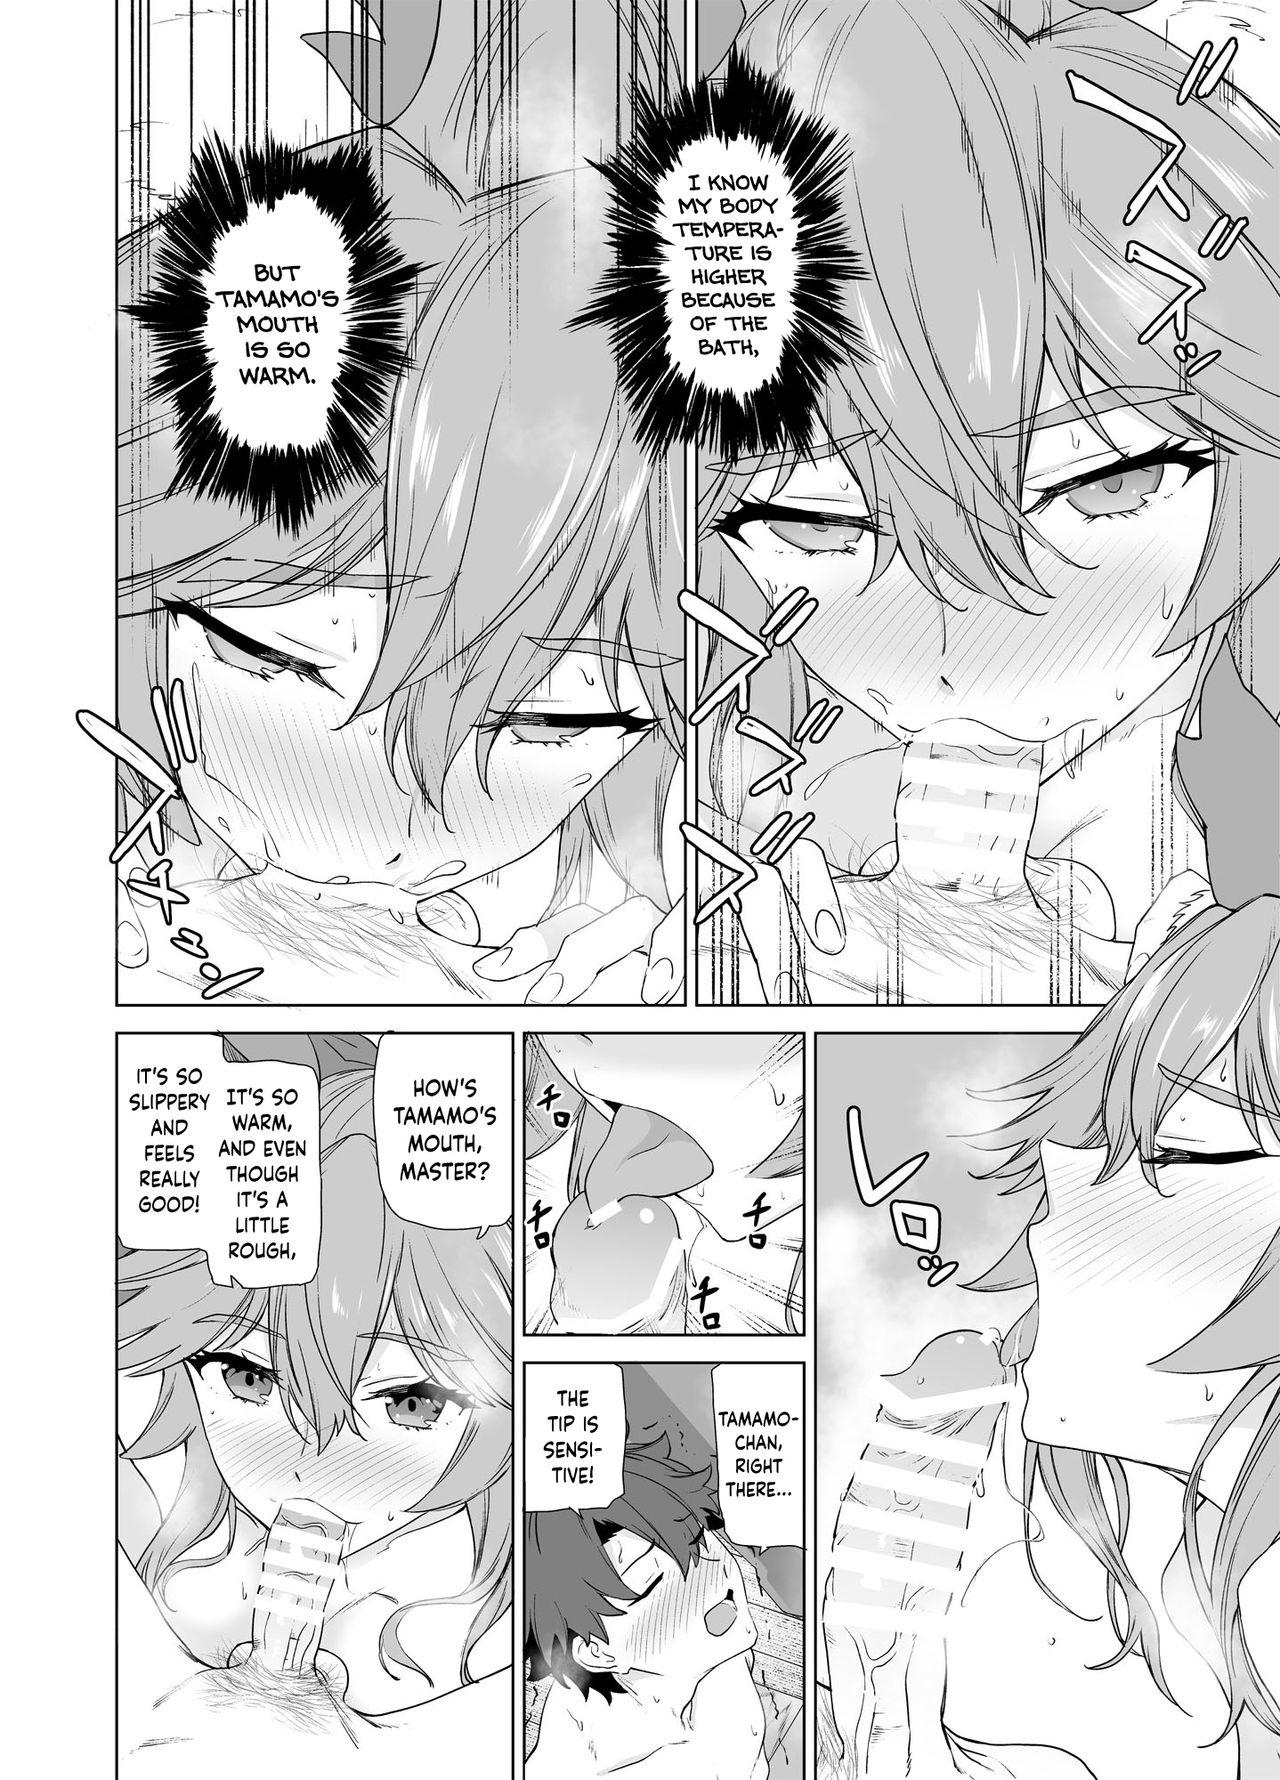 Swallow Master, Iindesu yo? | Master, it's alright? - Fate grand order Domination - Page 9